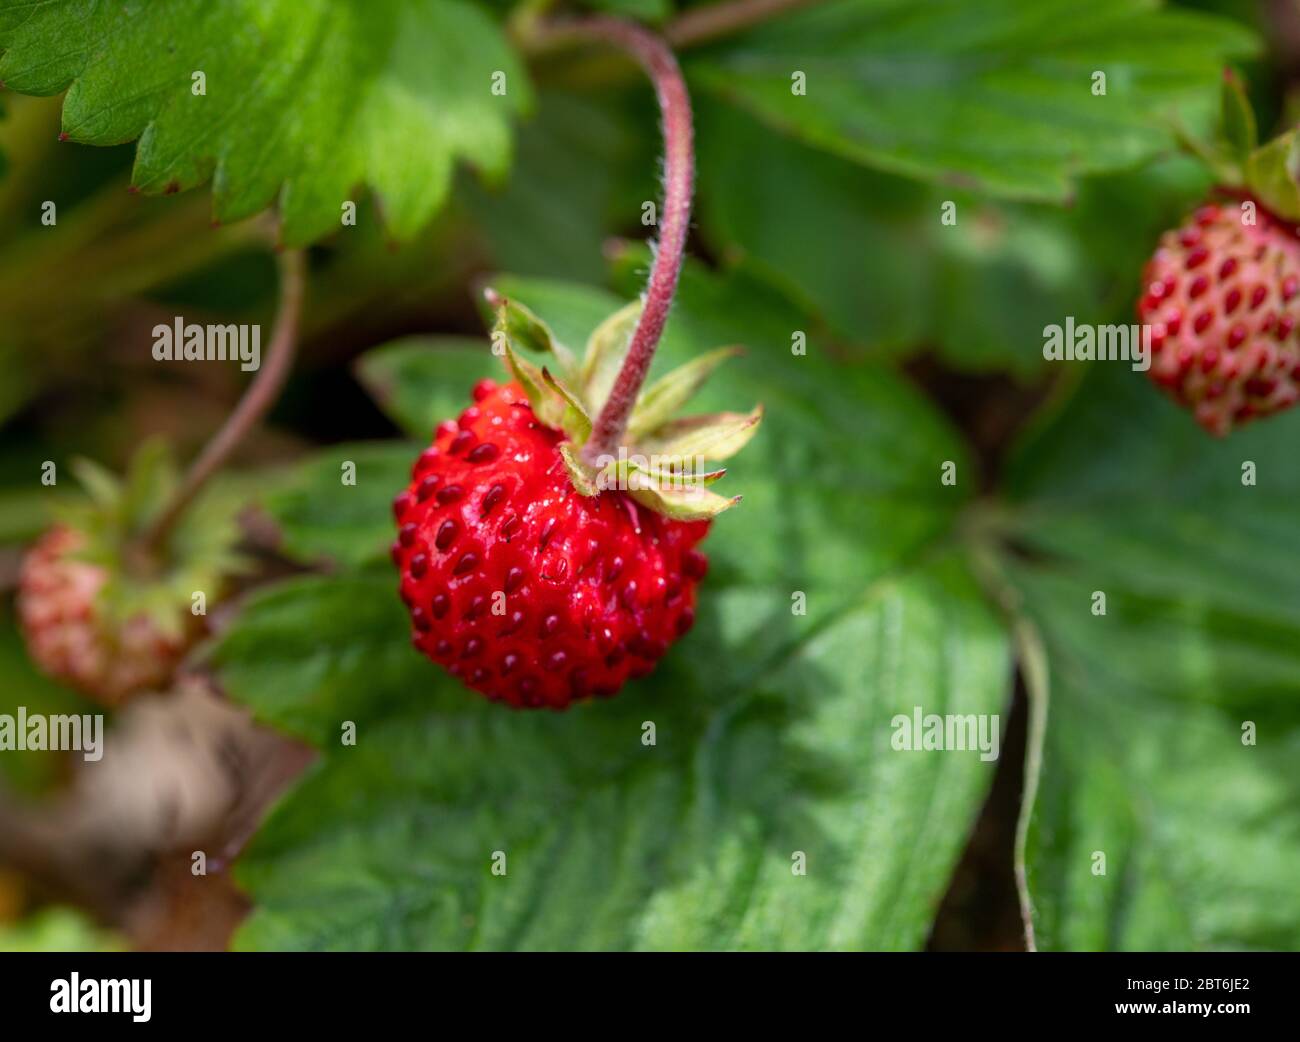 Ripe red Fragaria vesca or wild strawberry growing in forest close up Stock Photo